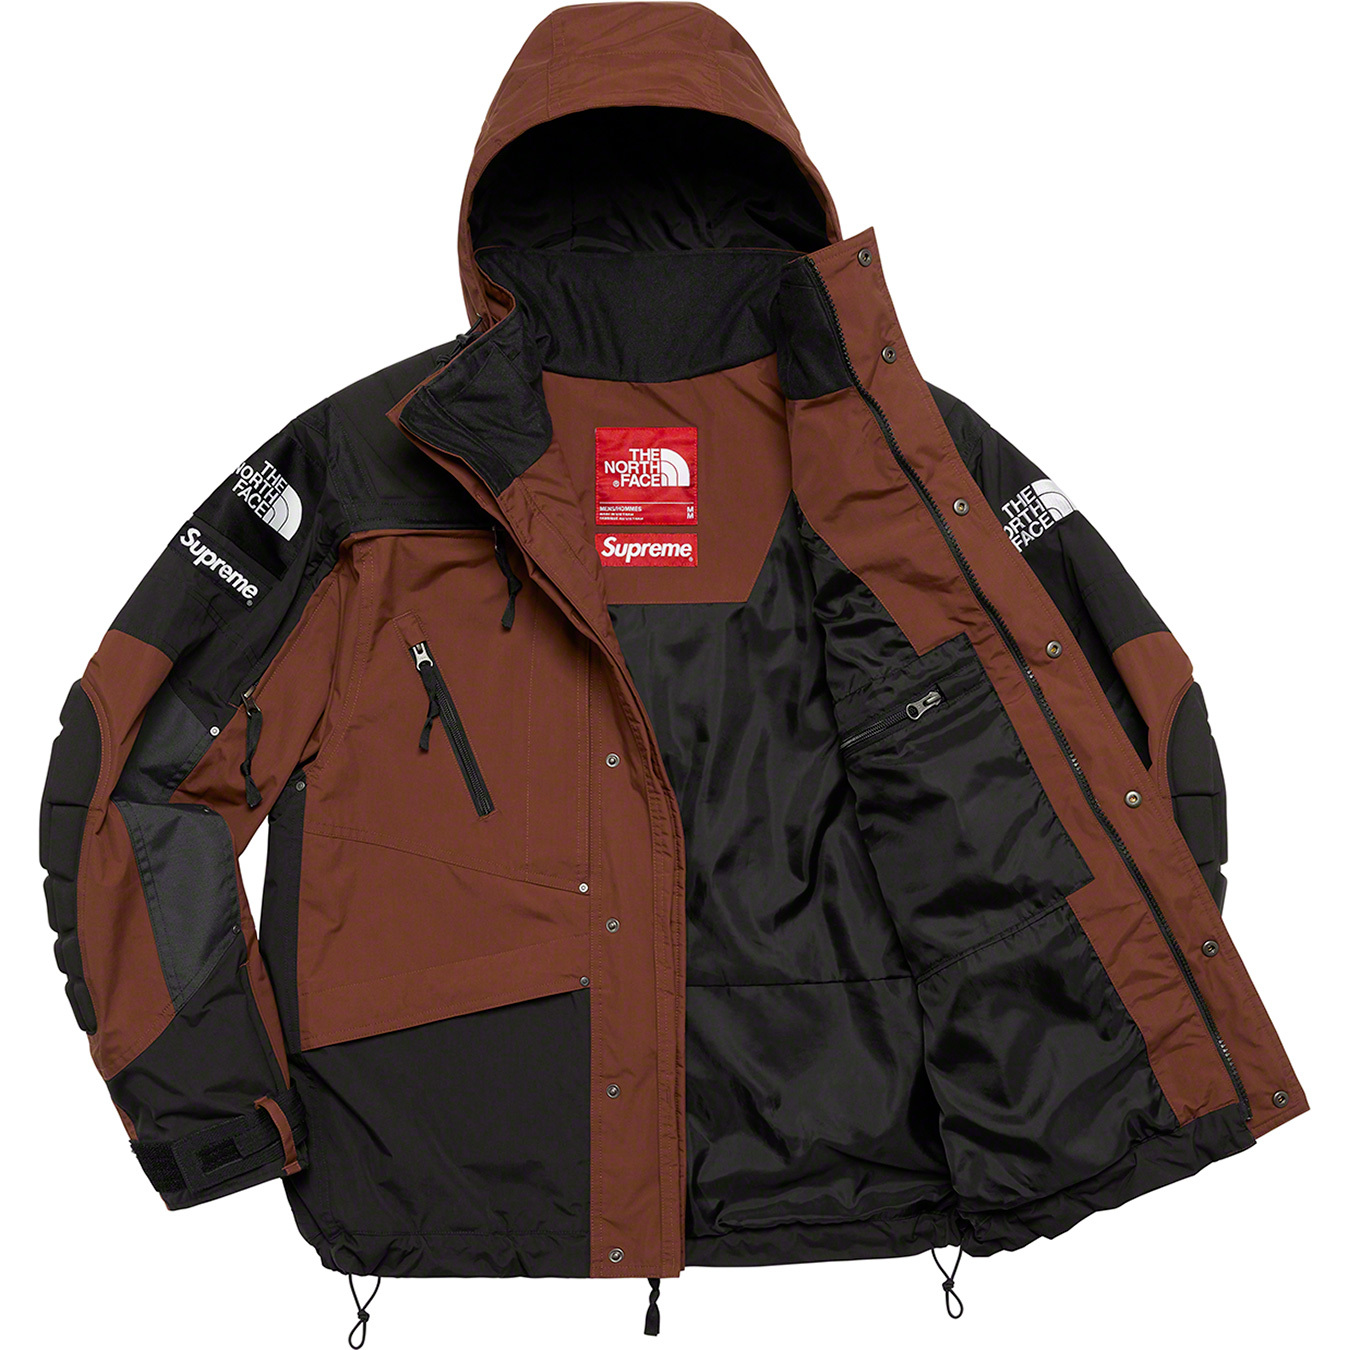 Supreme®/The North Face® Steep Tech Apogee Jacket | Supreme 22fw